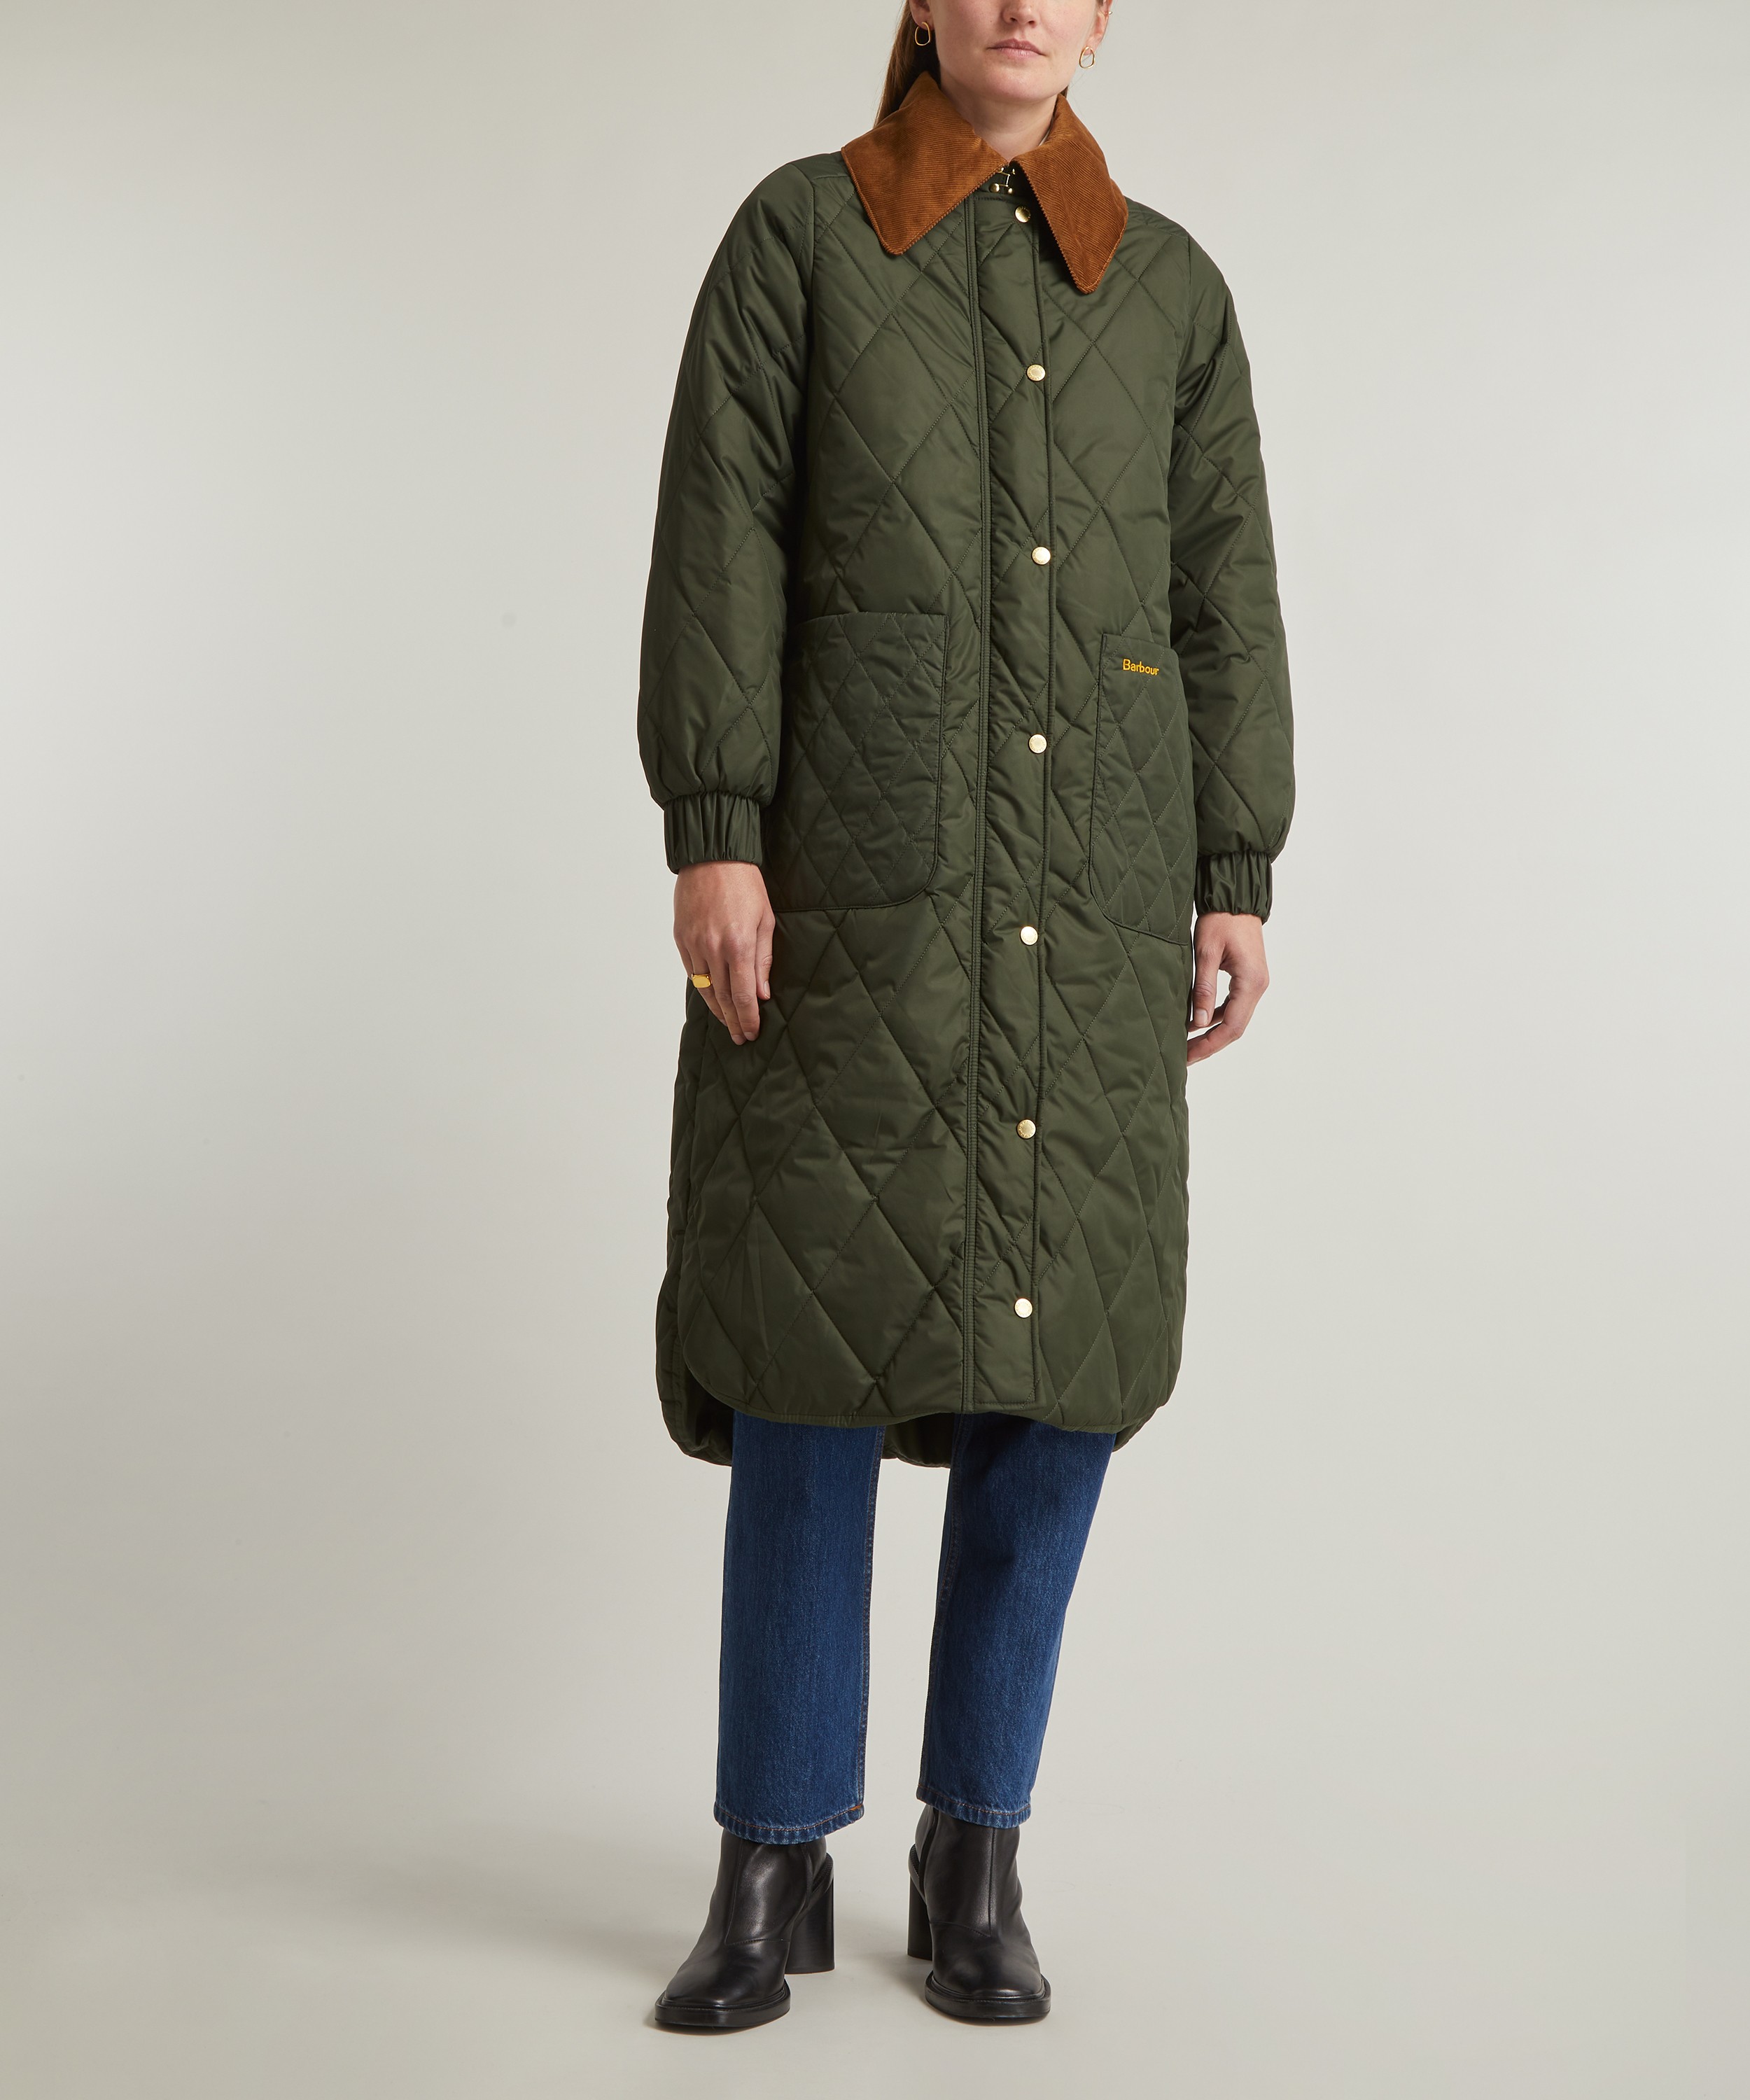 Barbour Marsett Quilted Jacket | Liberty